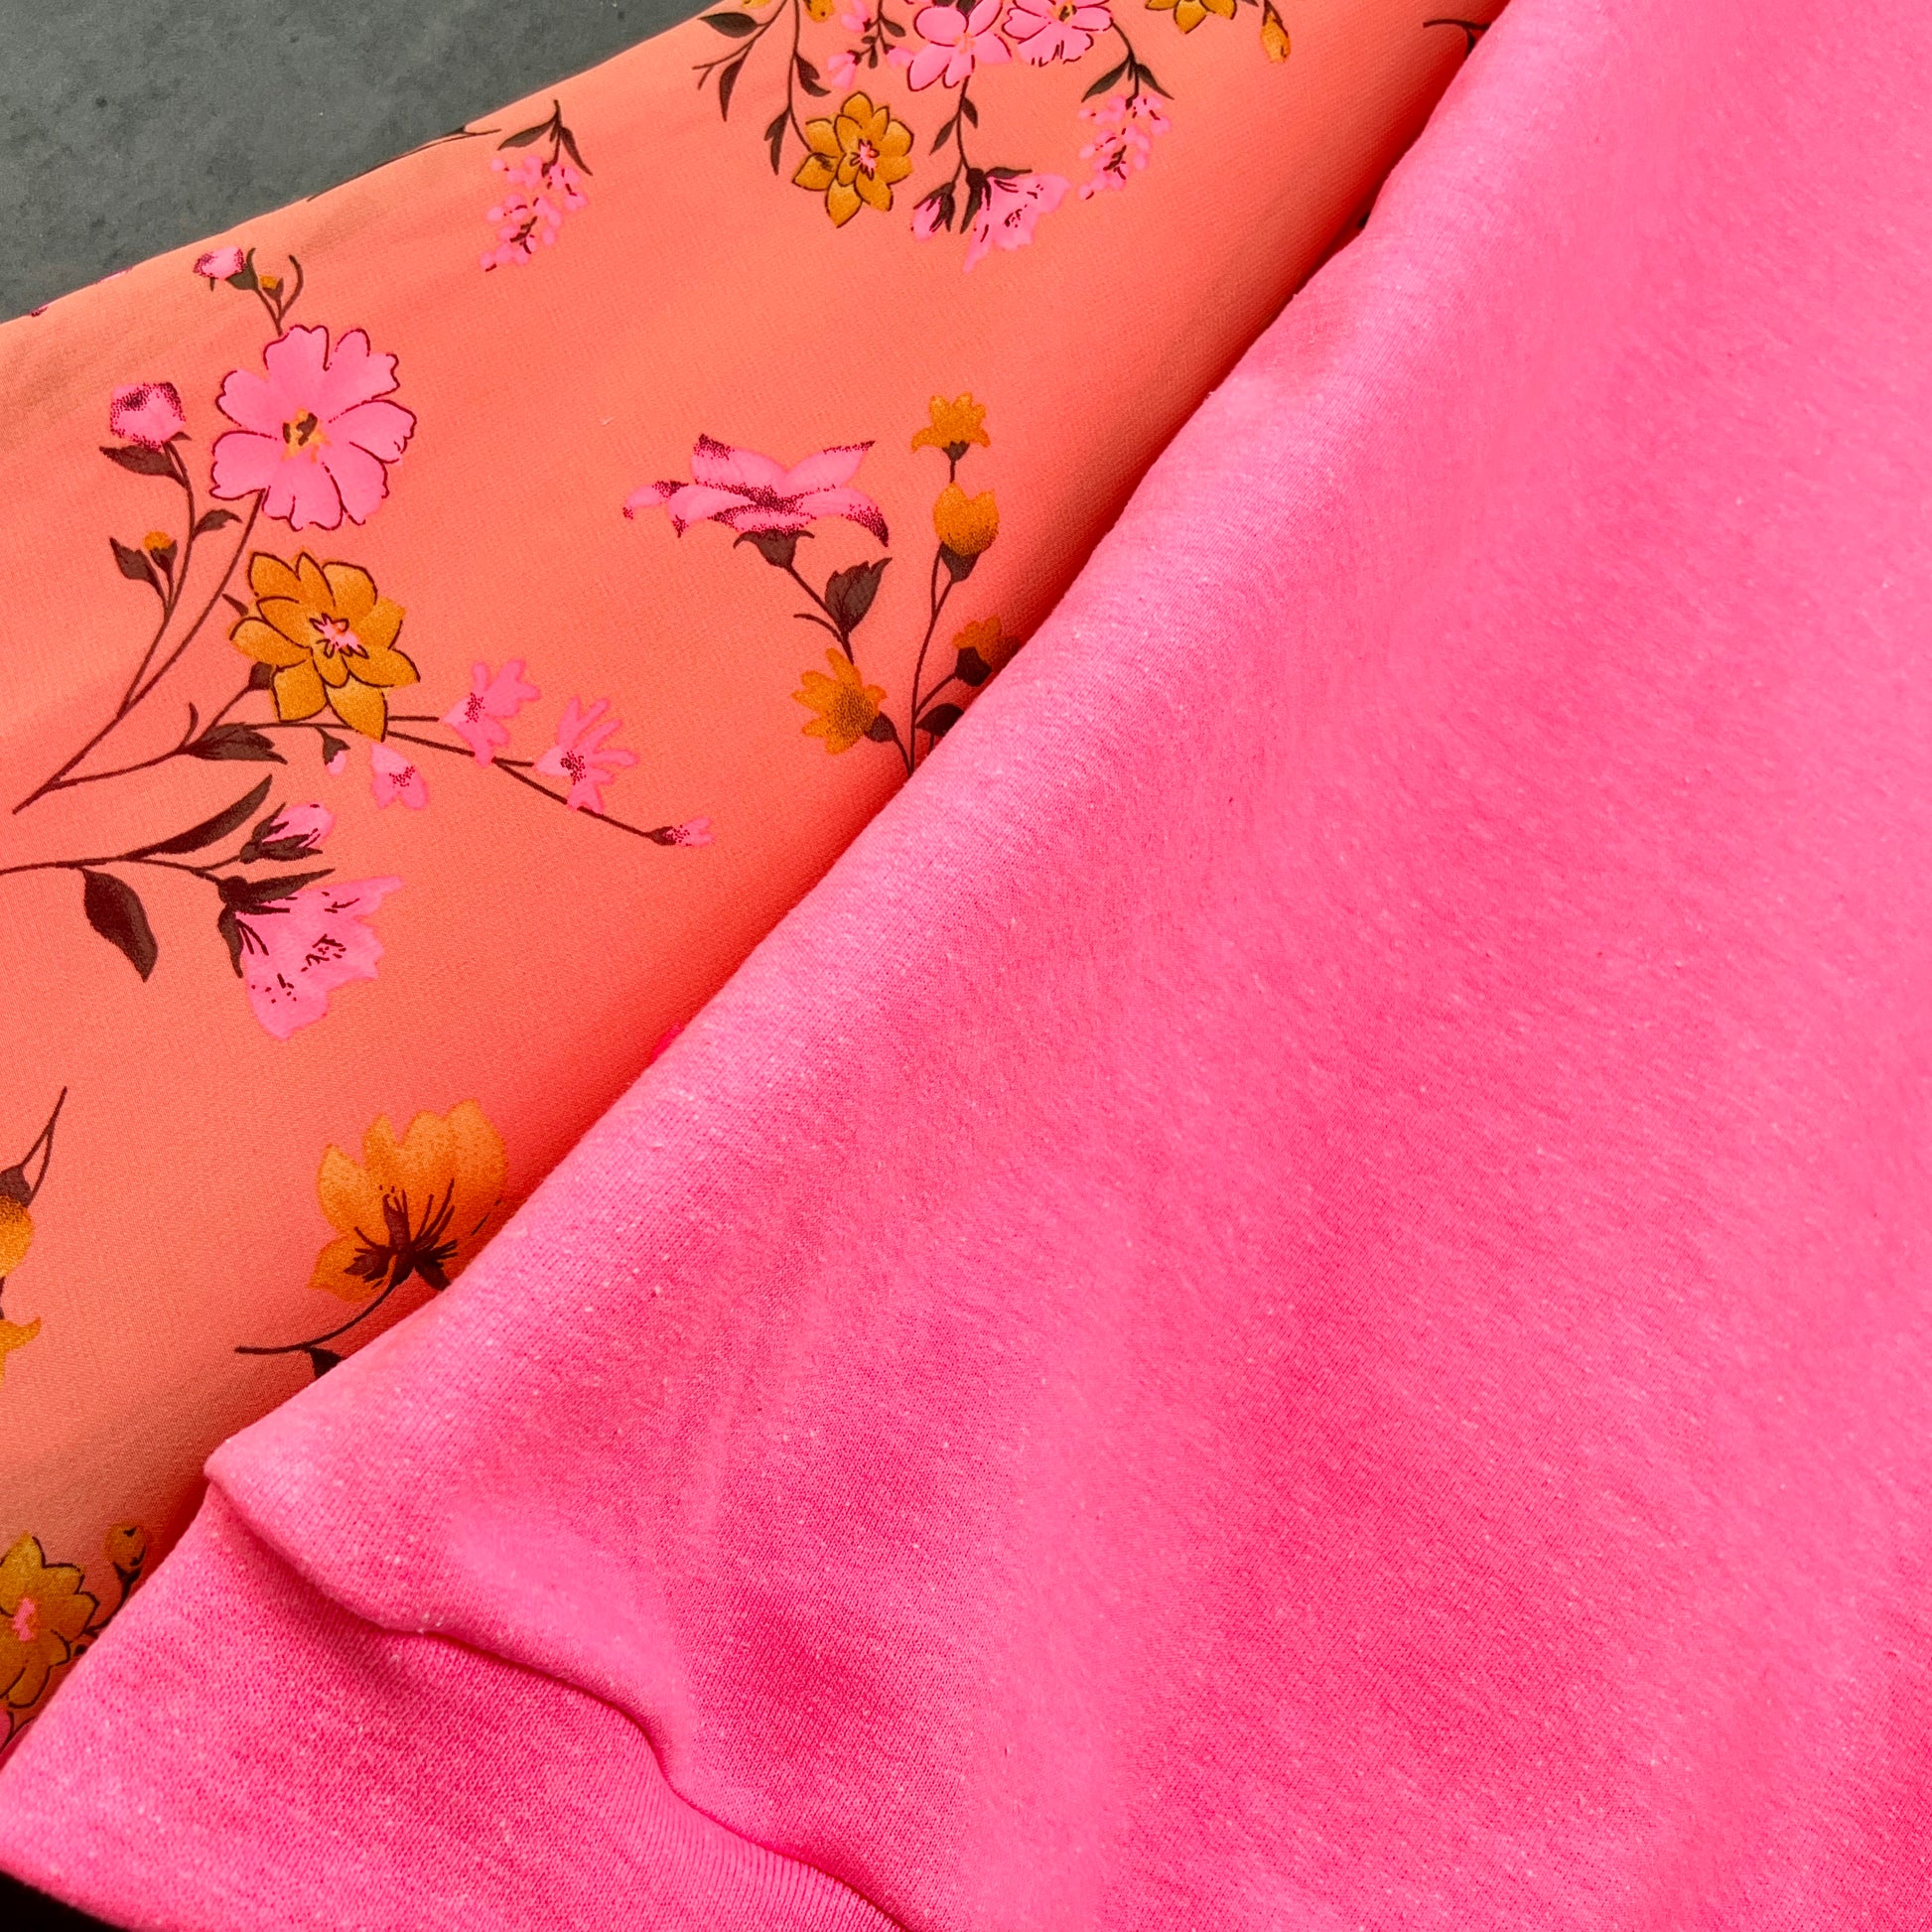 Detail view of neon hot pink sweatshirt on hanger in front of cement gray background. Sweatshirt has puff sleeves with bright coral pink and marigold colorful floral.